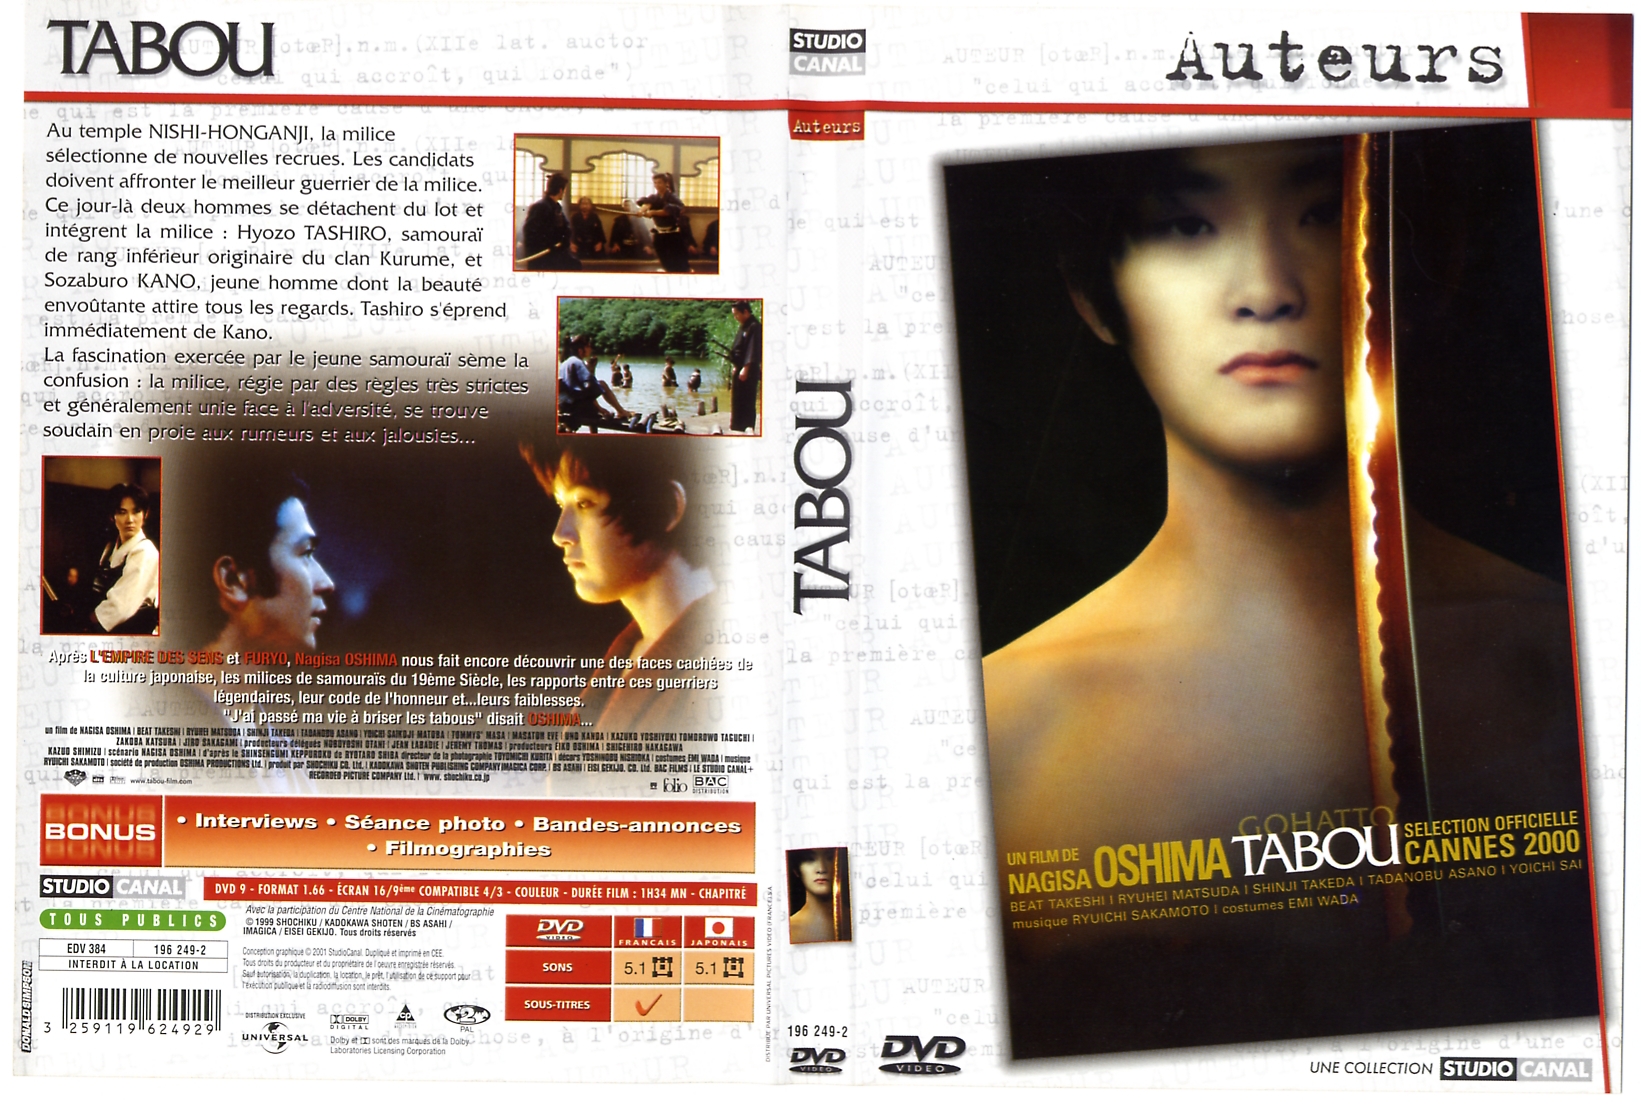 Jaquette DVD Tabou